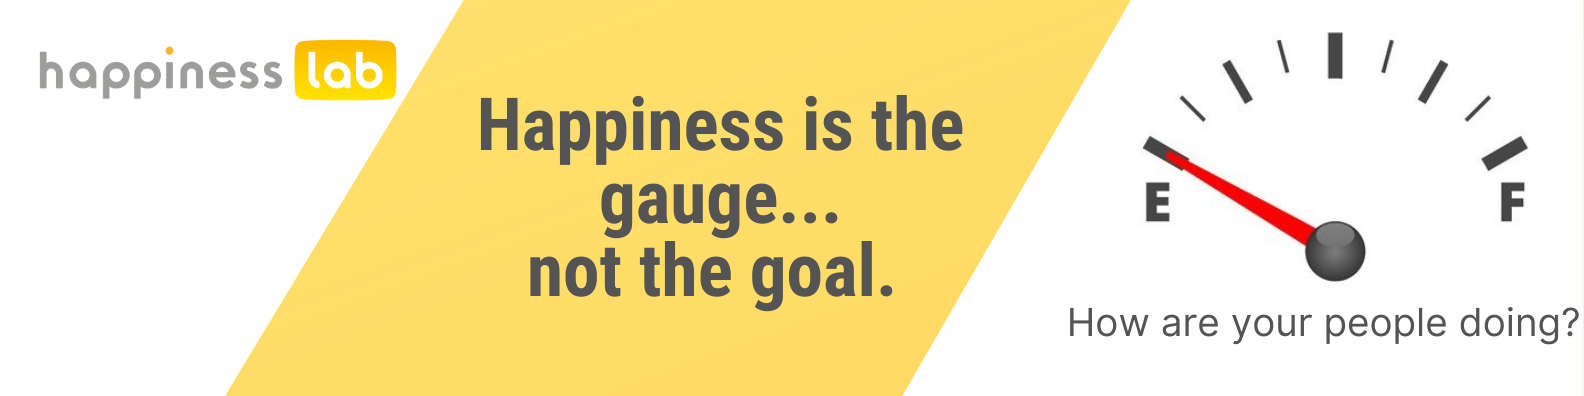 Happiness is the gauge not the goal